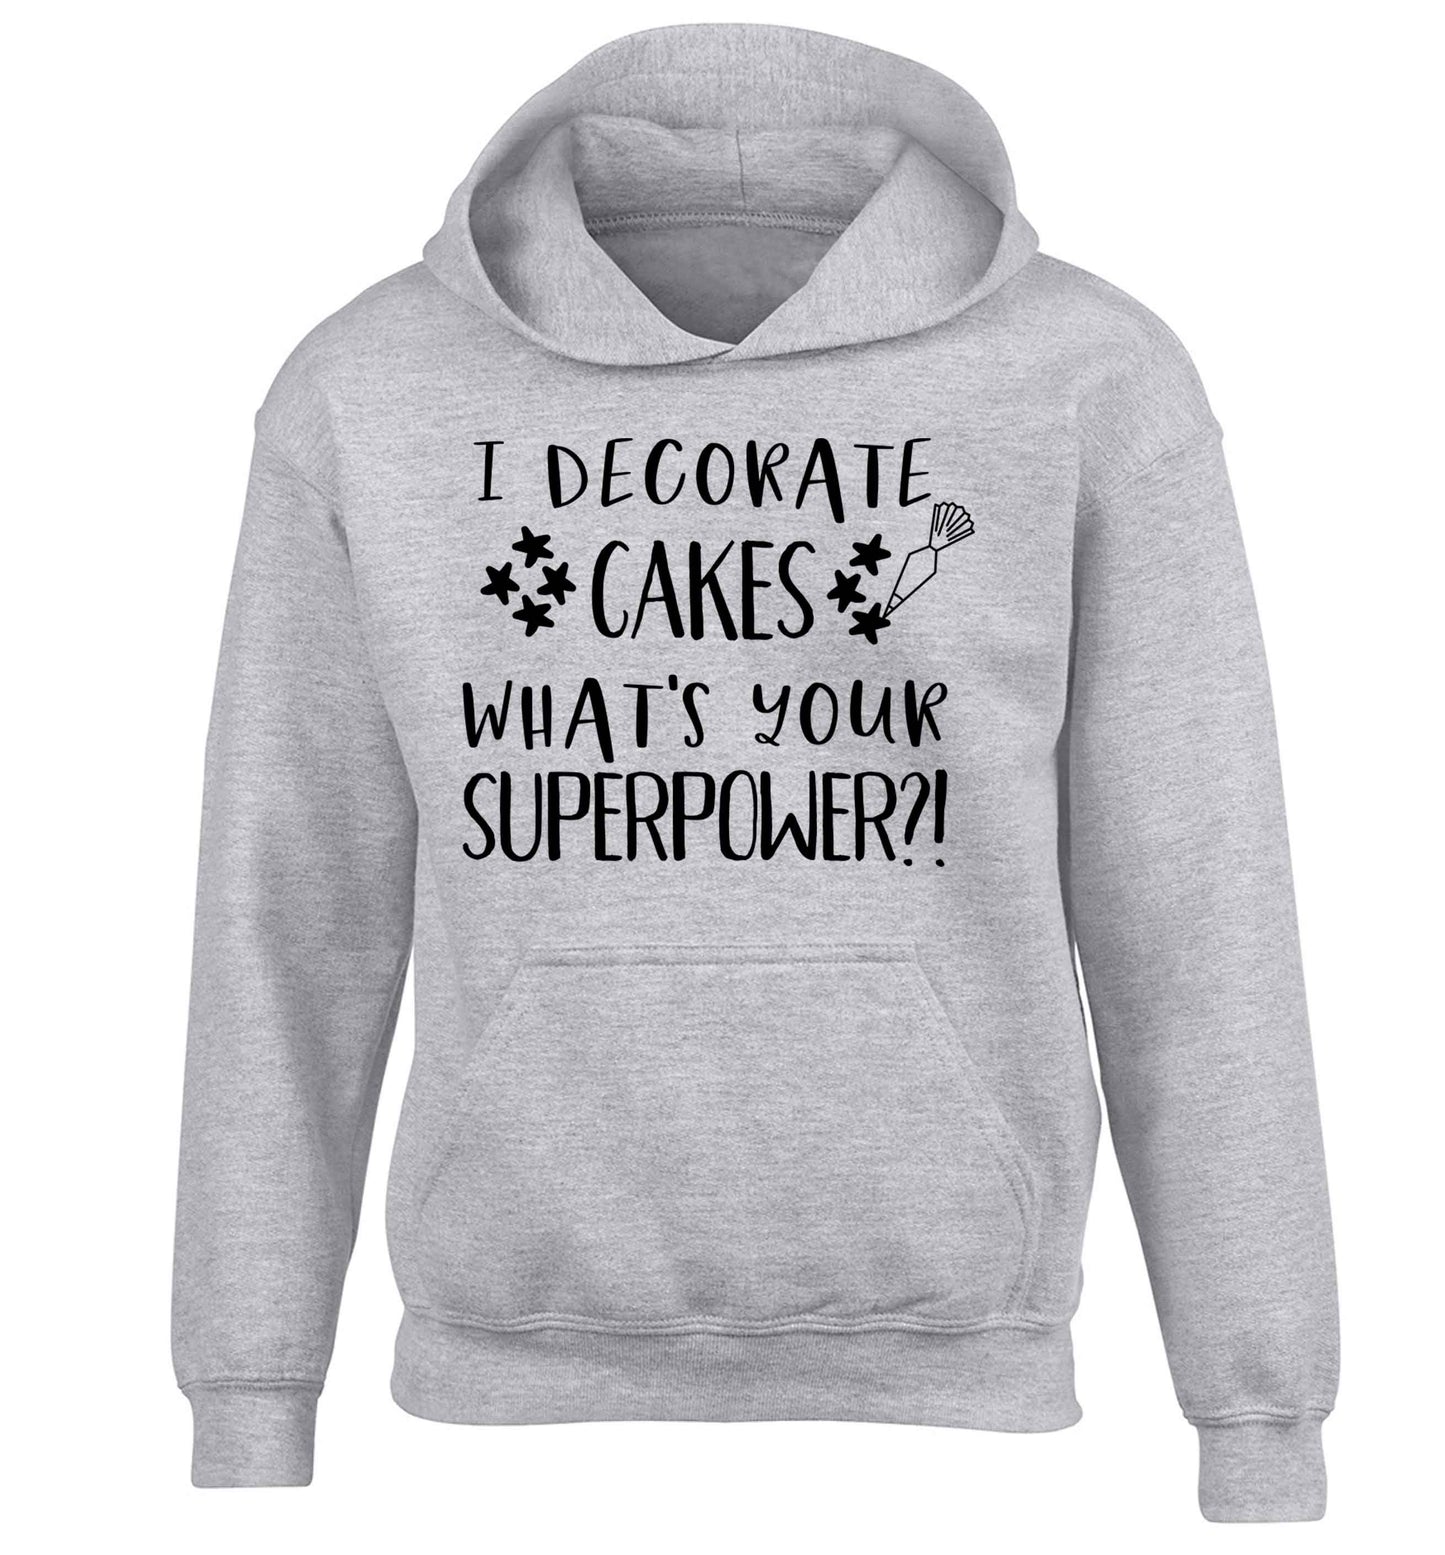 I decorate cakes what's your superpower?! children's grey hoodie 12-13 Years